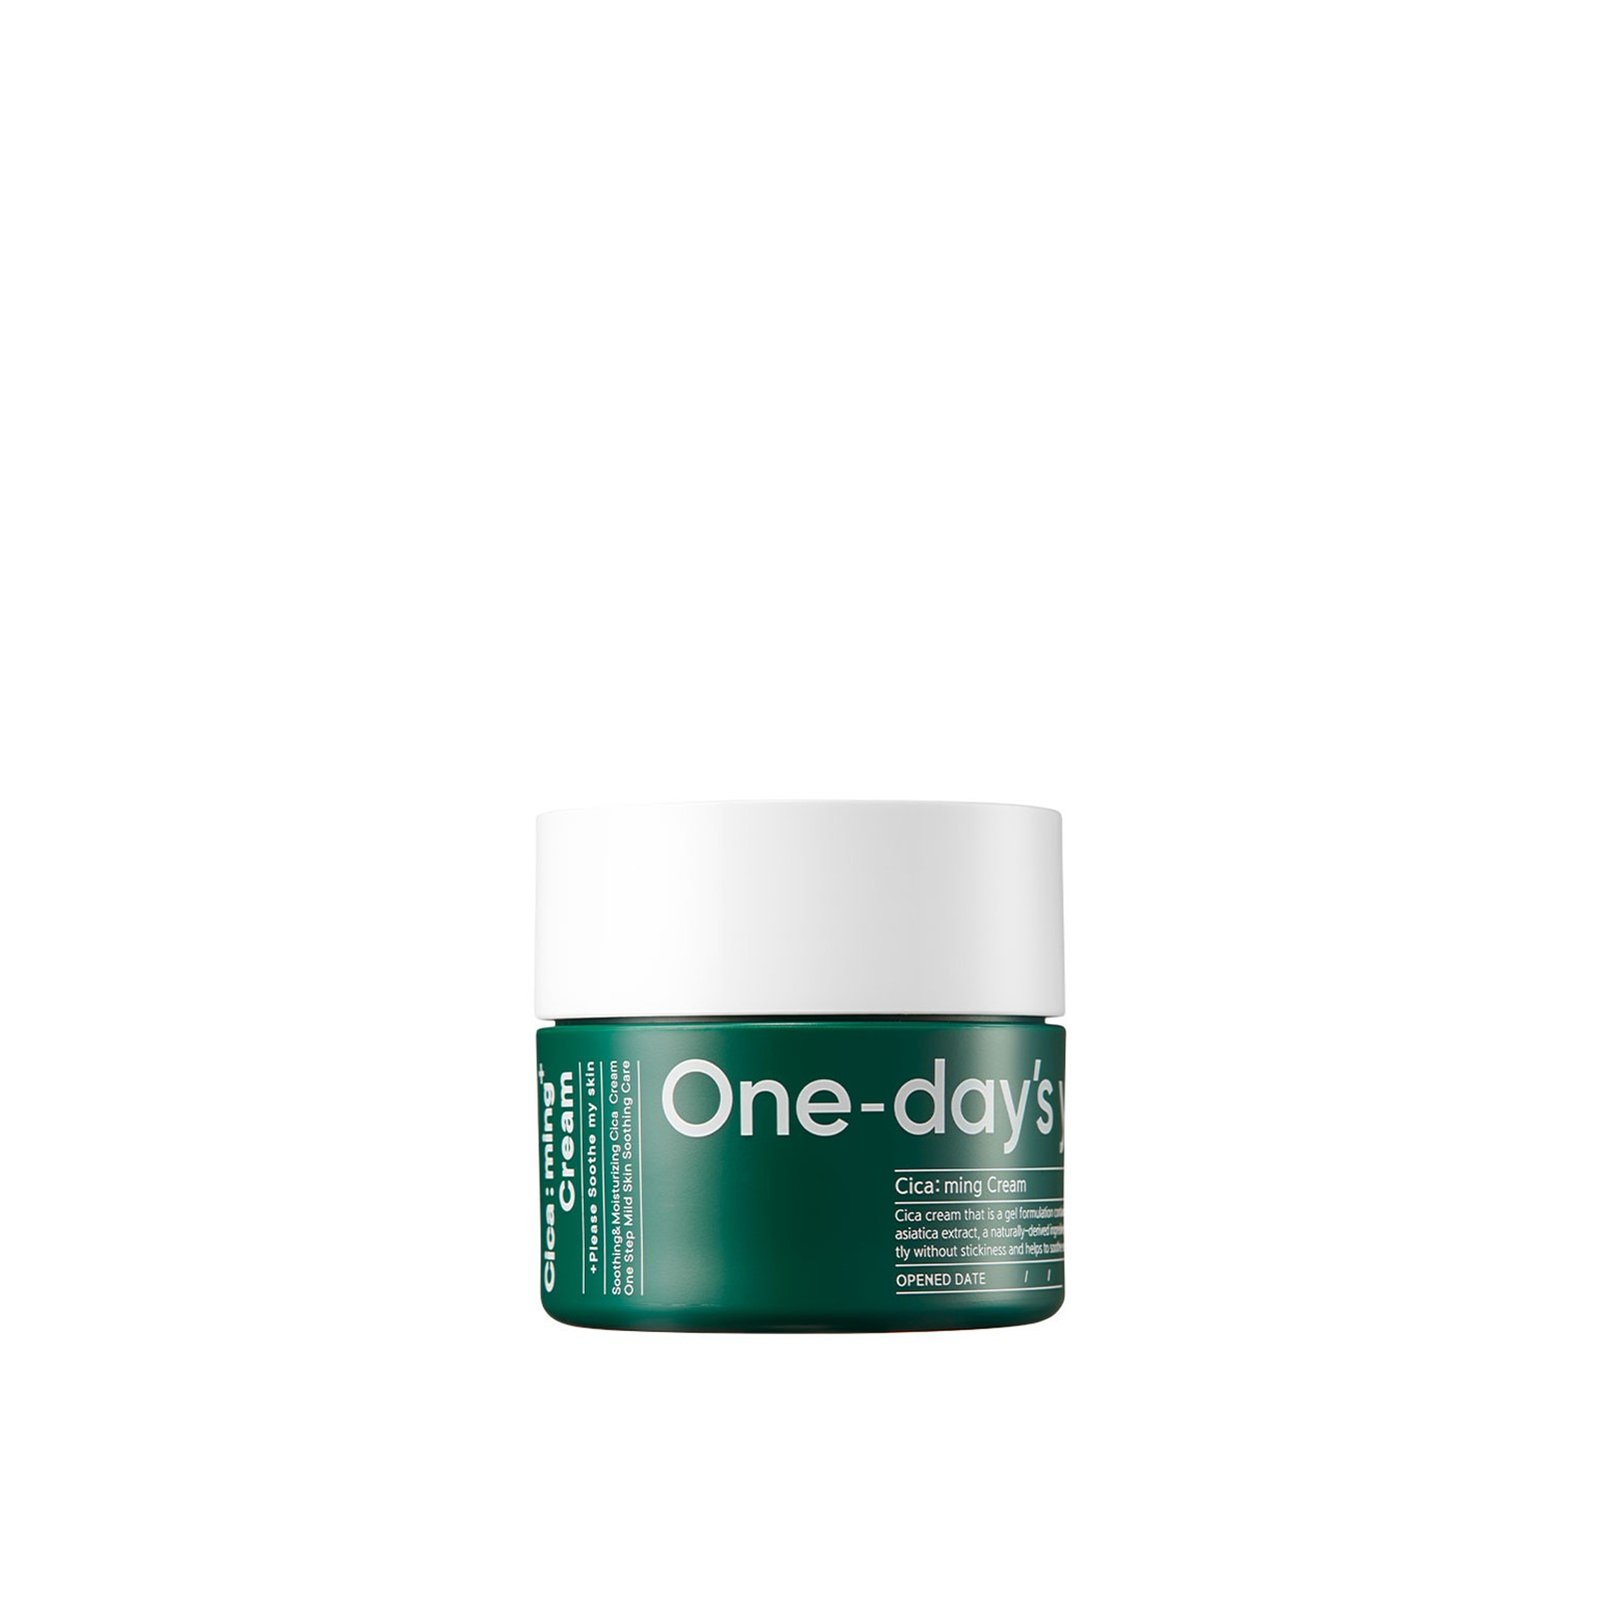 One-day's you Cica:ming Cream 50ml